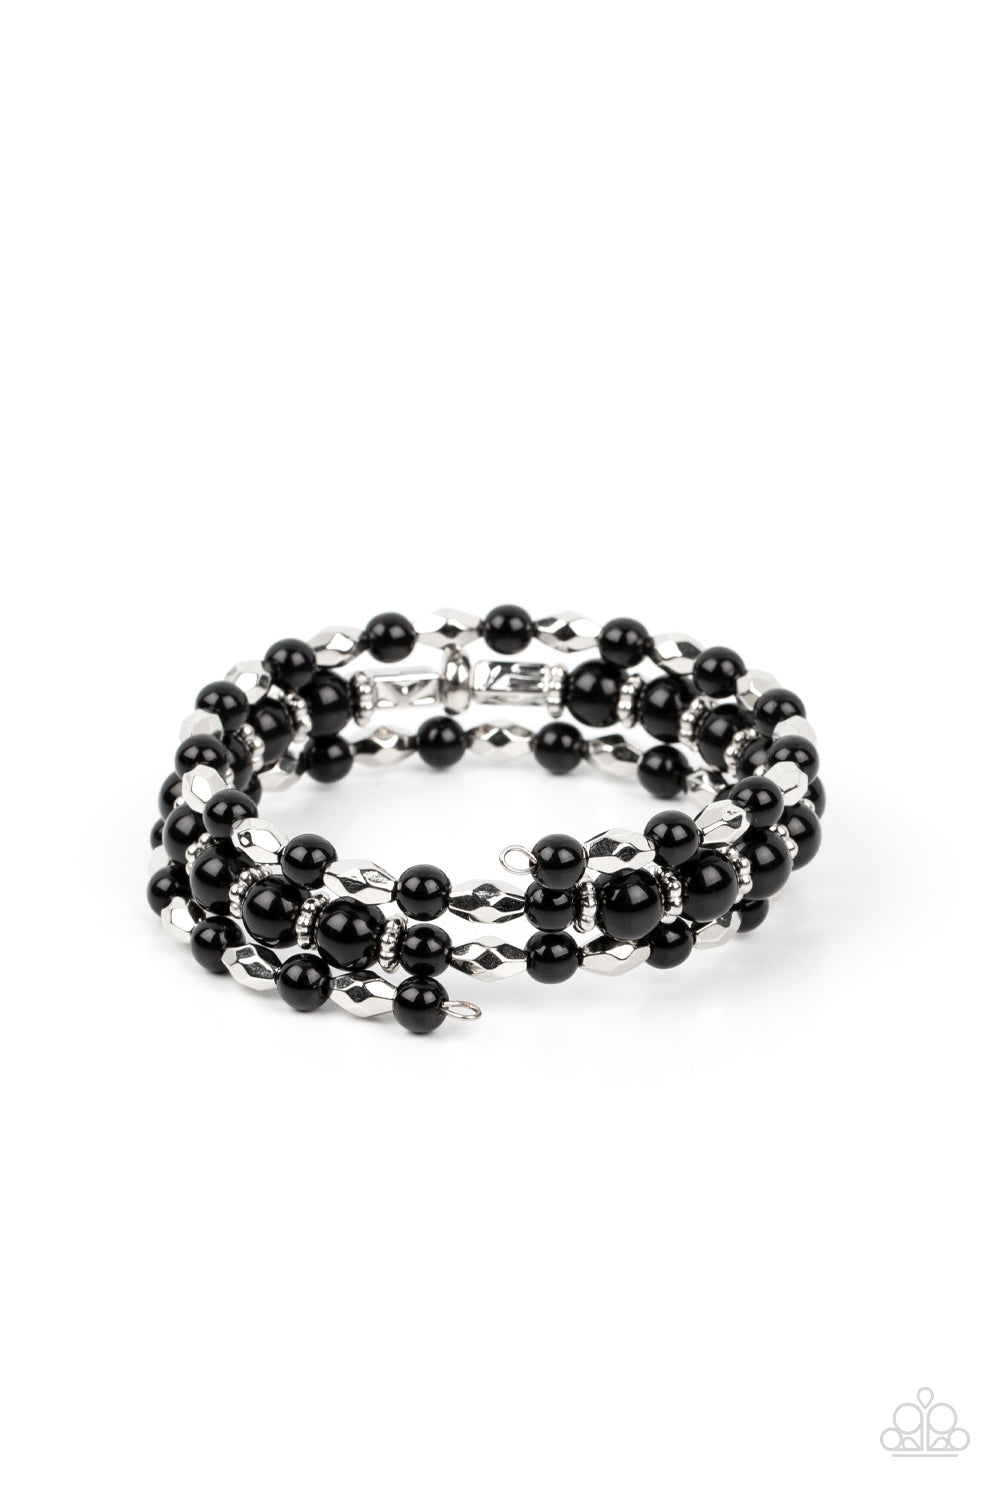 Colorfully Coiled - Black Beads, Faceted Silver Beads, & Silver Ring Paparazzi Coil Bracelet